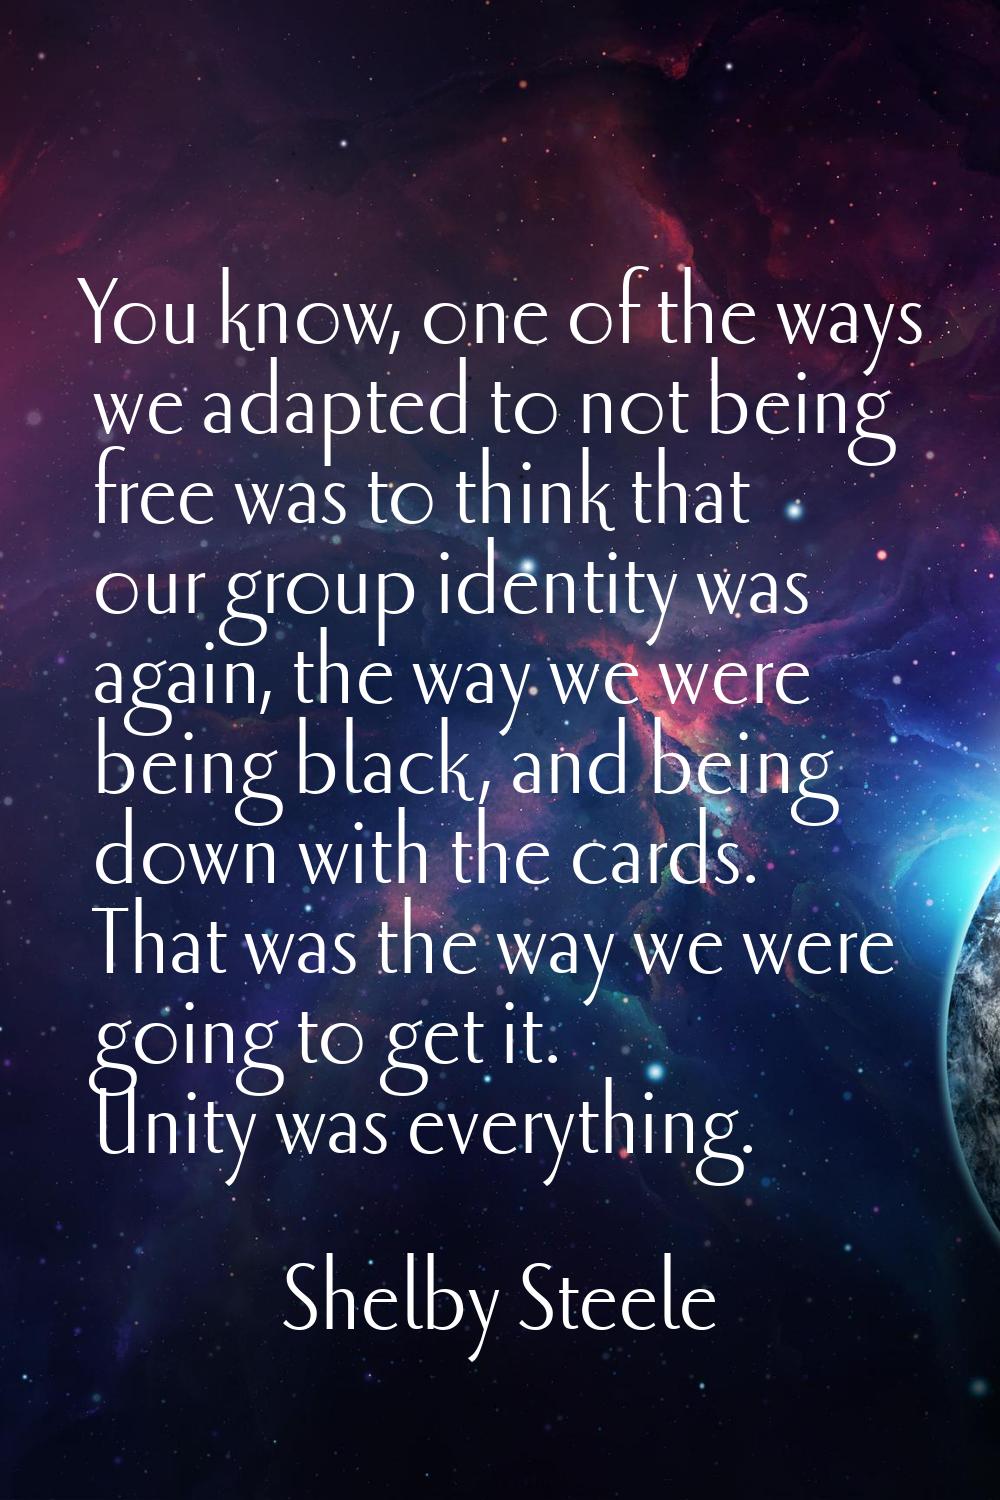 You know, one of the ways we adapted to not being free was to think that our group identity was aga